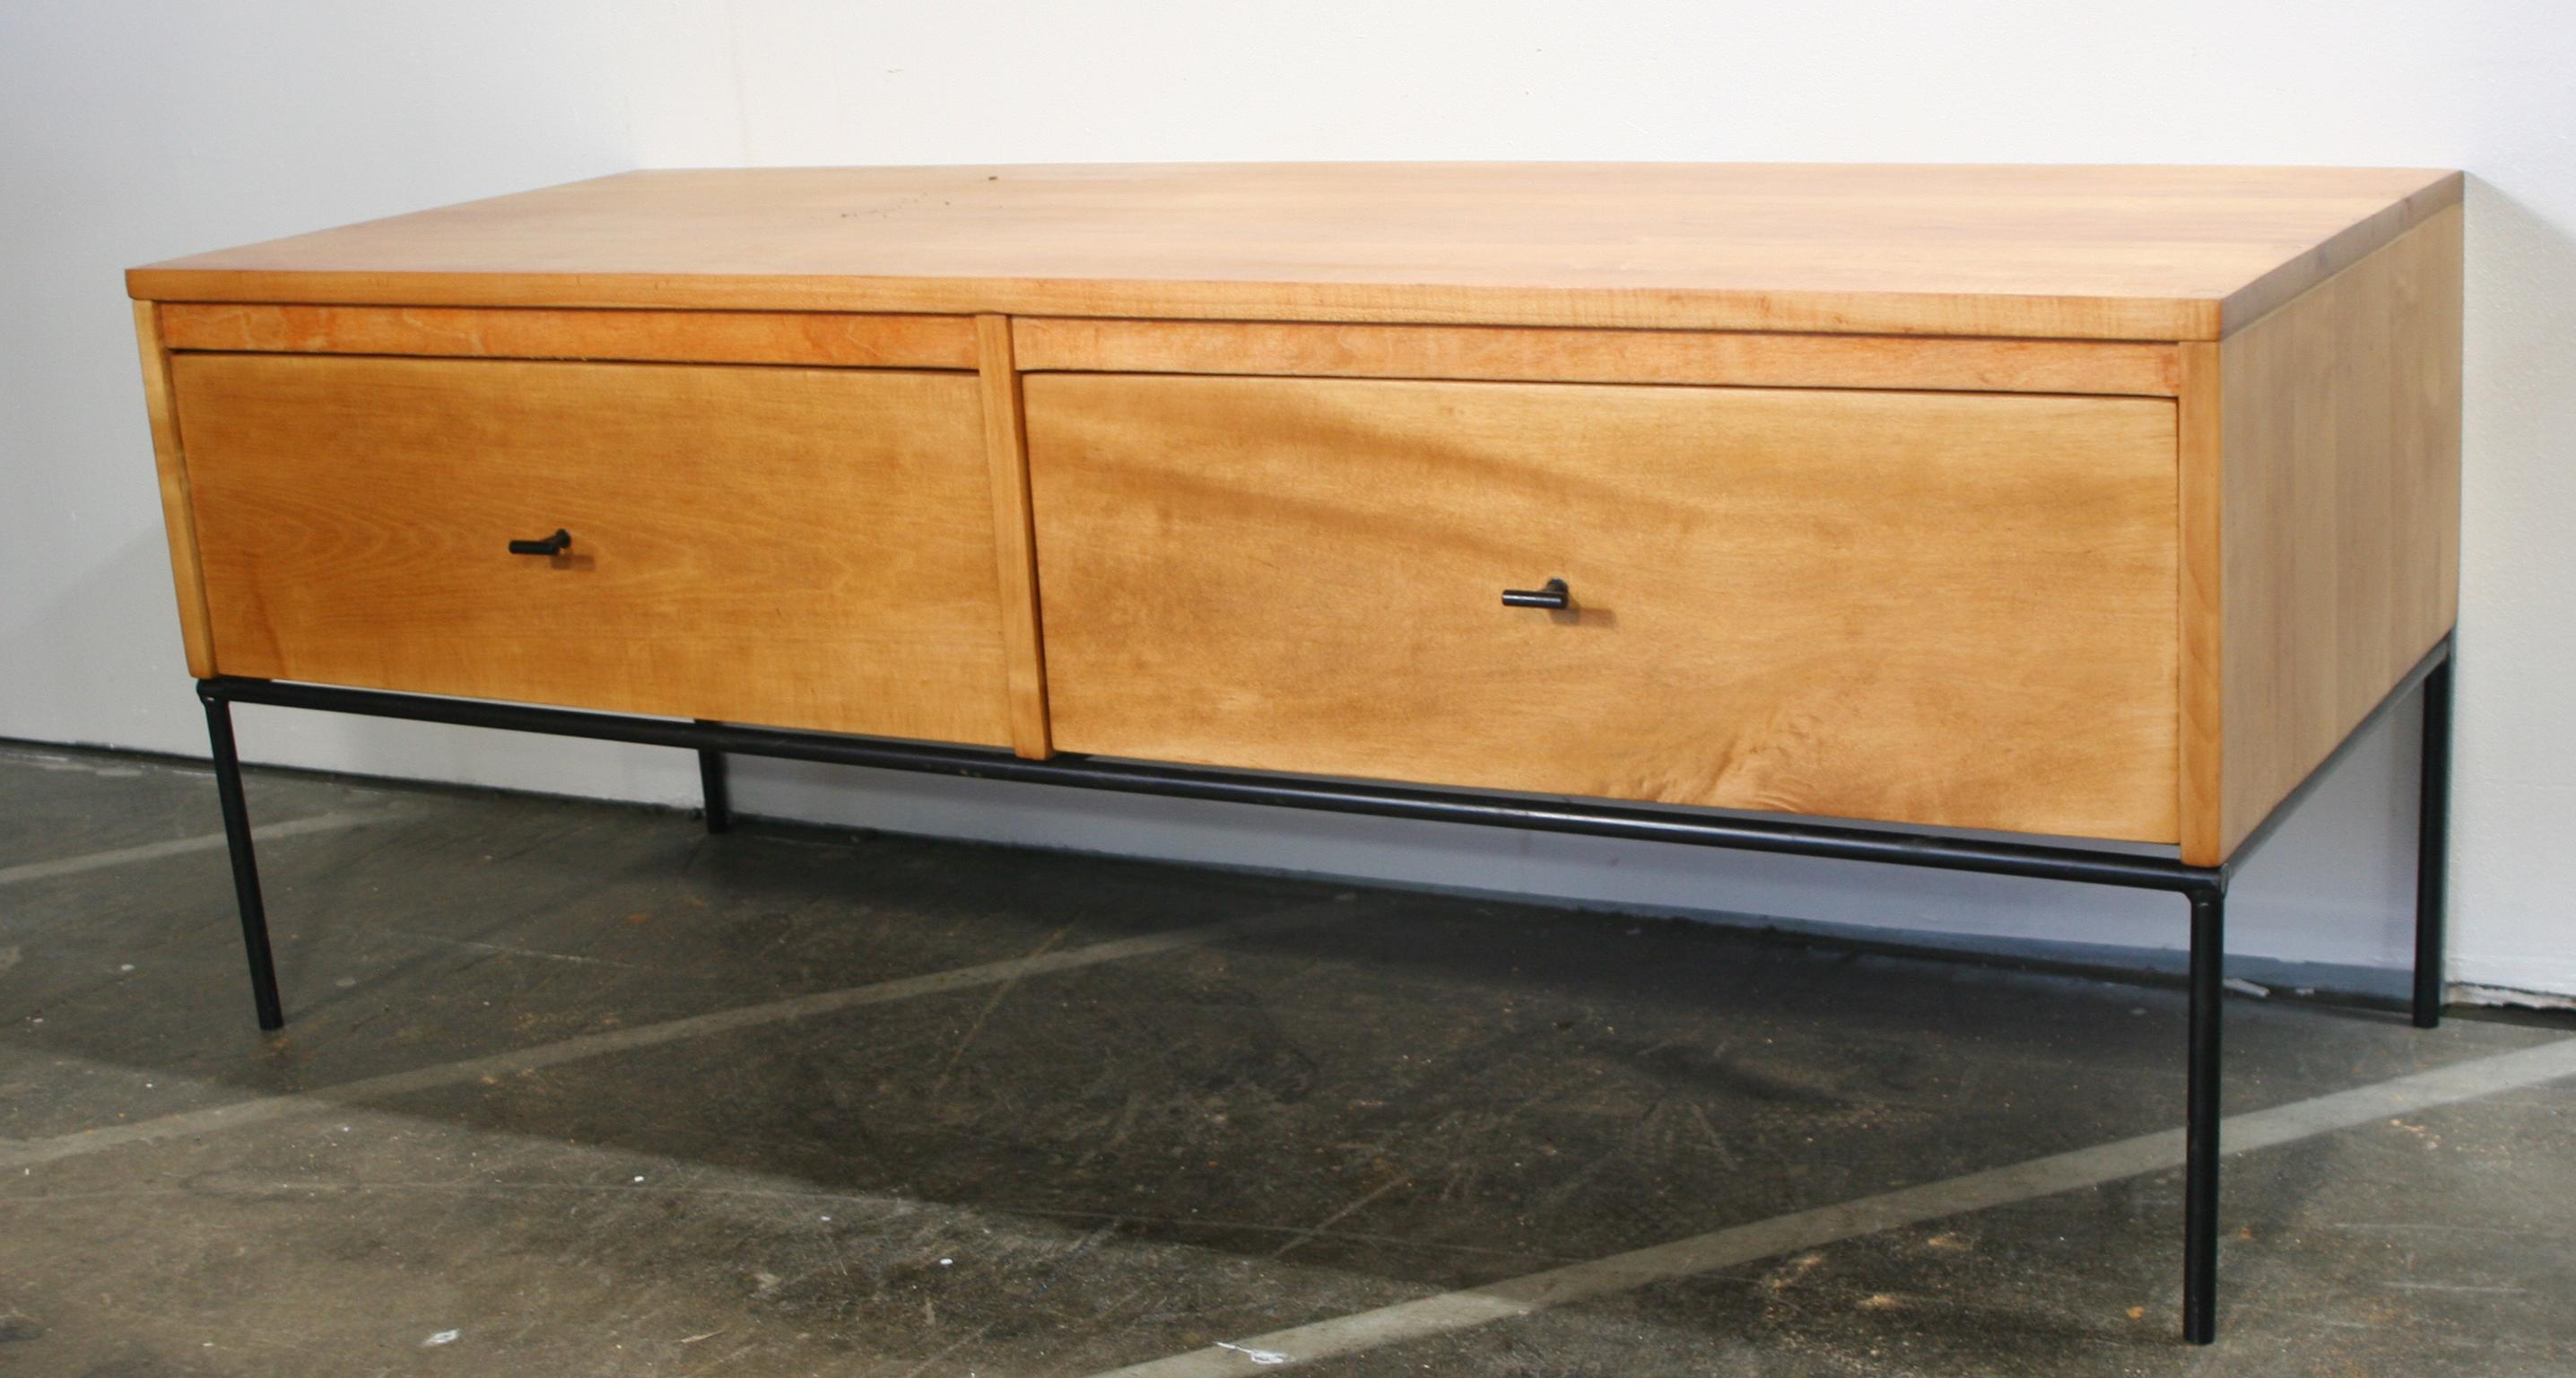 Unique rare custom midcentury low dresser small Credenza by Paul McCobb circa 1950 Planner Group with two low drawers - solid maple construction has a raw Blonce lacquered finish. All original Steel T pulls. Sits on an iron base with 4 legs.